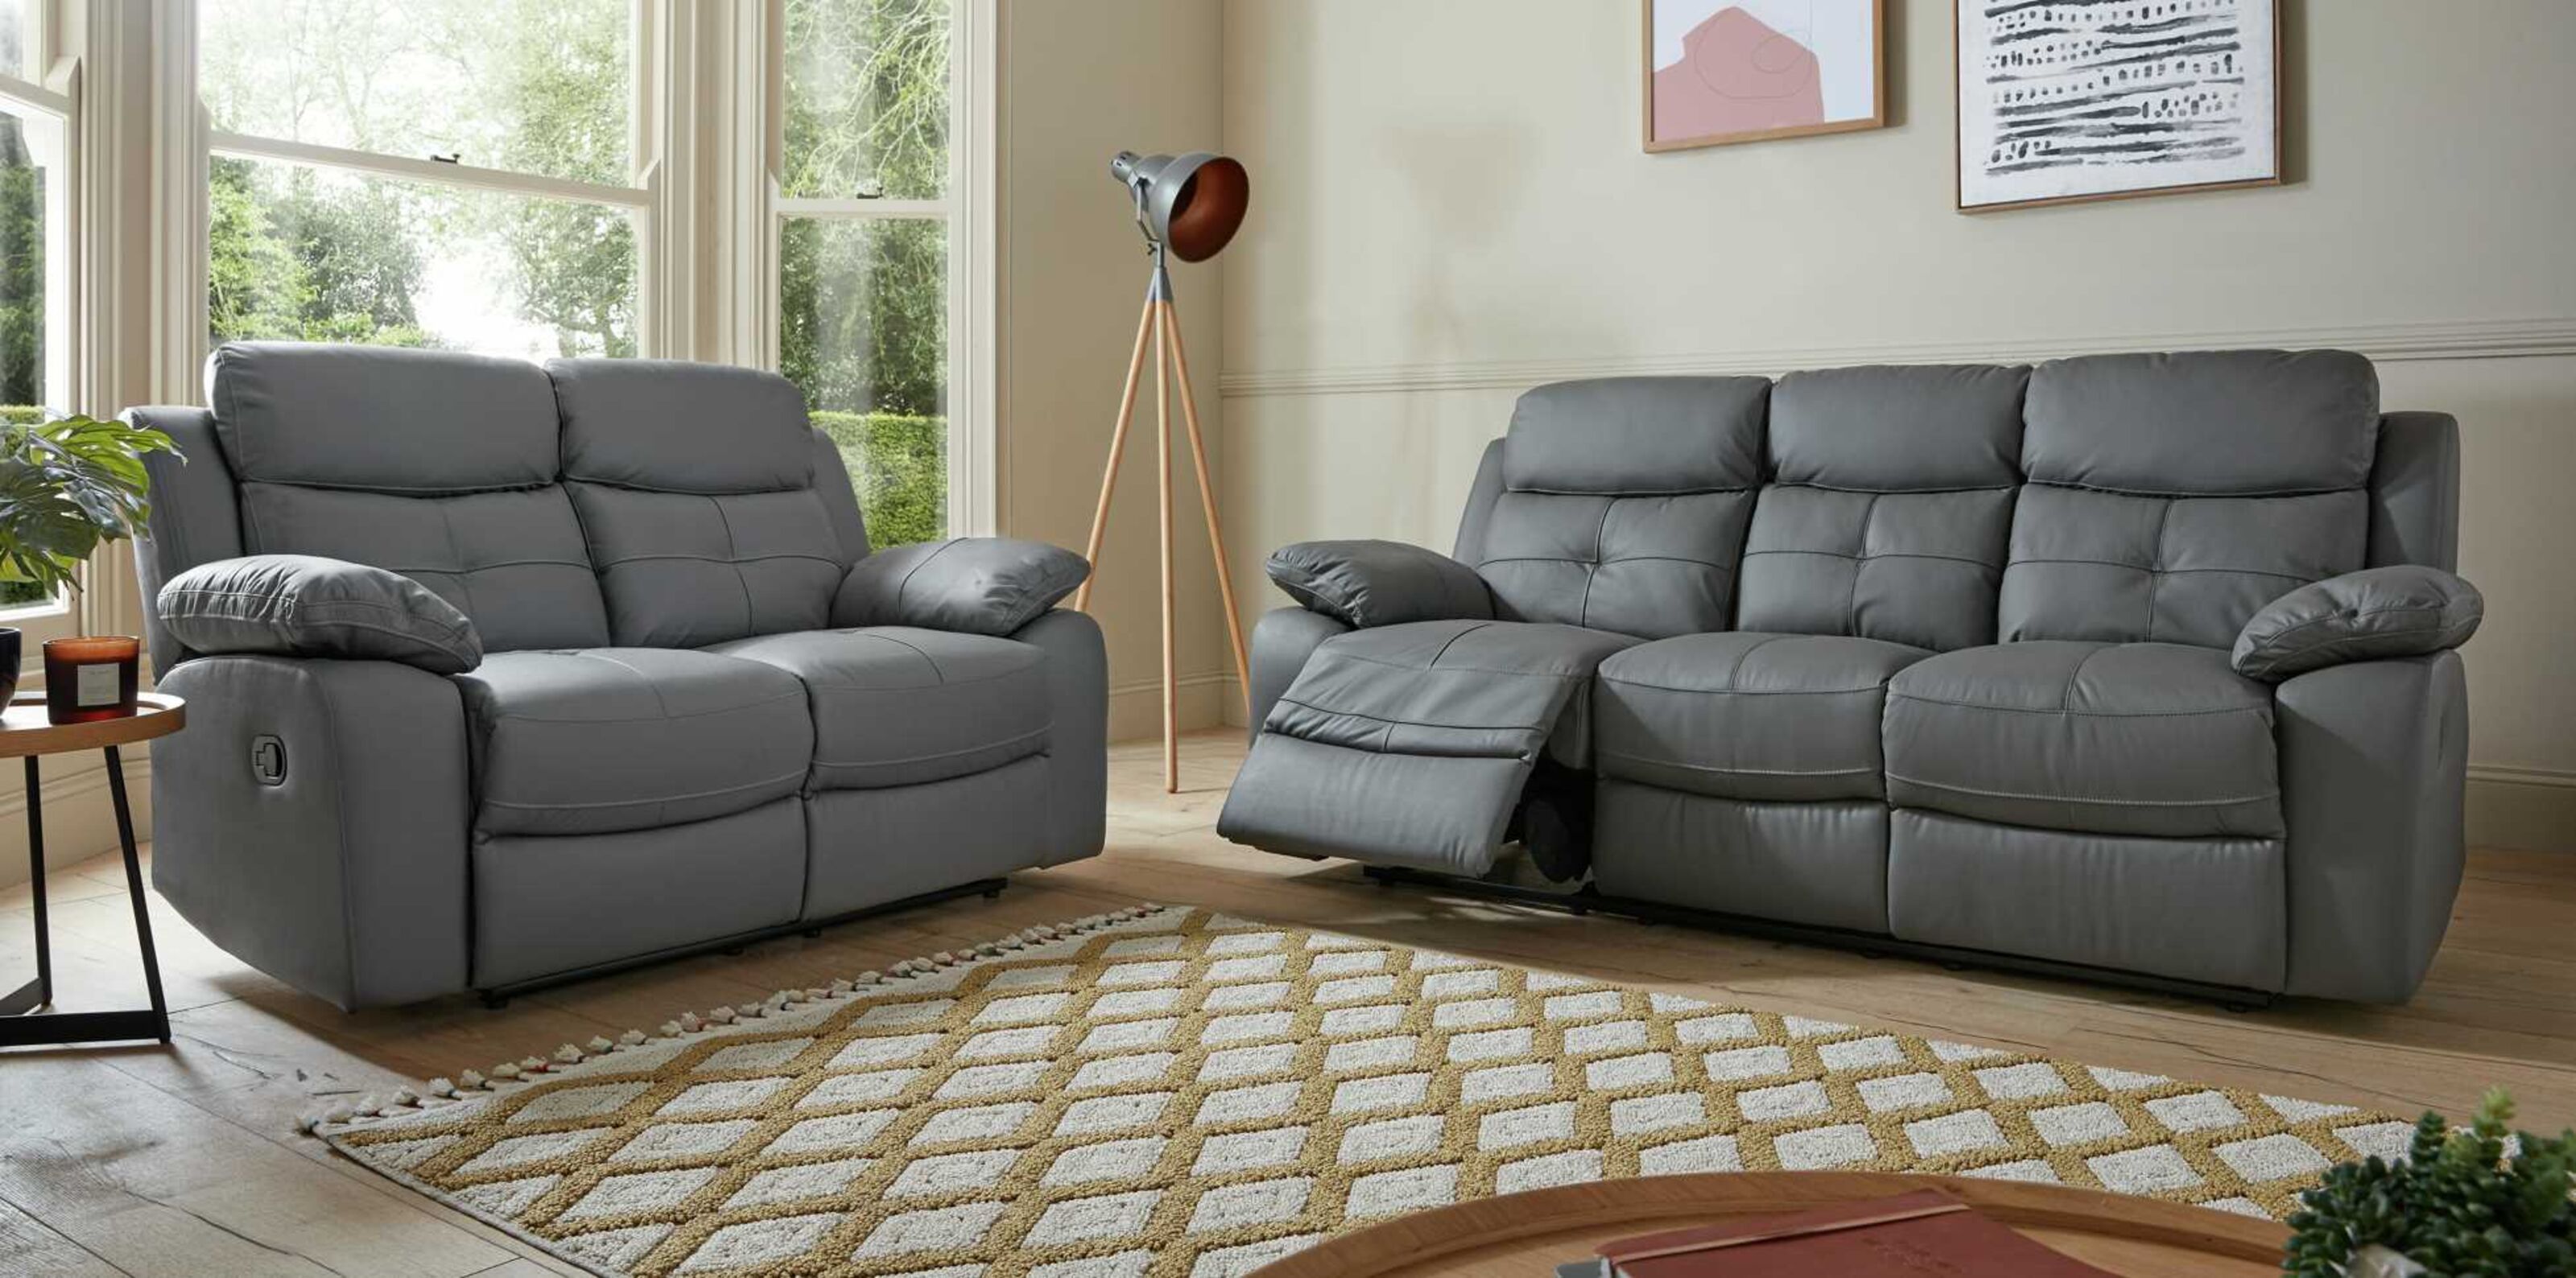 Brisbane's Elegant Seating: Discover Chesterfield Sofas  %Post Title